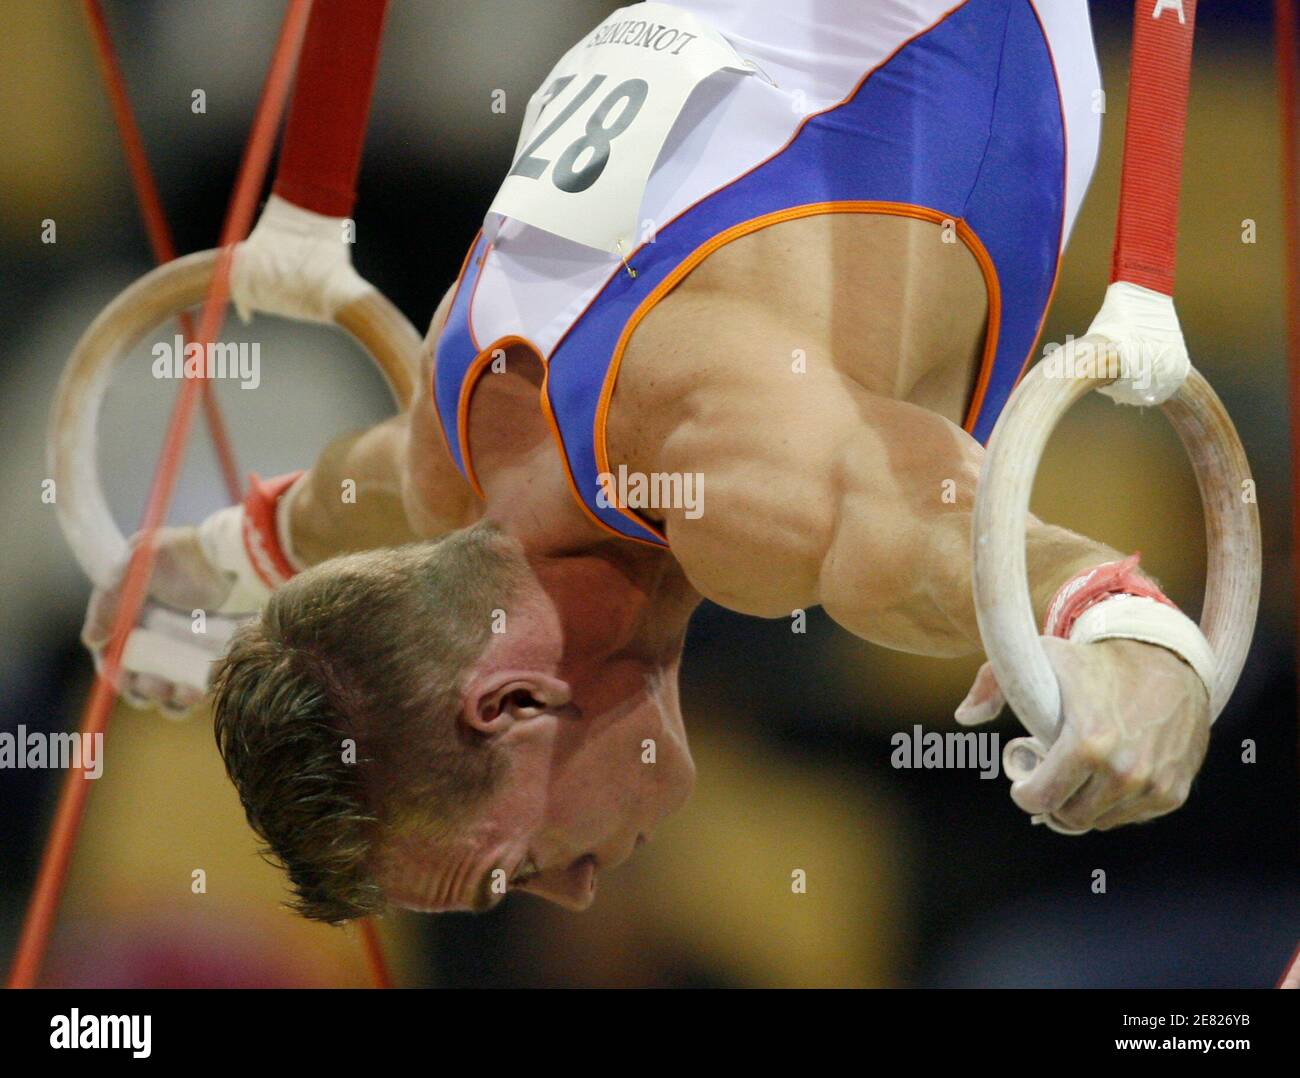 The Netherlands' Yuri Van Gelder competes on the rings during the men's qualification at the 39th Artistic Gymnastics World Championships in Aarhus, October 14, 2006. REUTERS/Wolfgang Rattay (DENMARK Stock Photo -